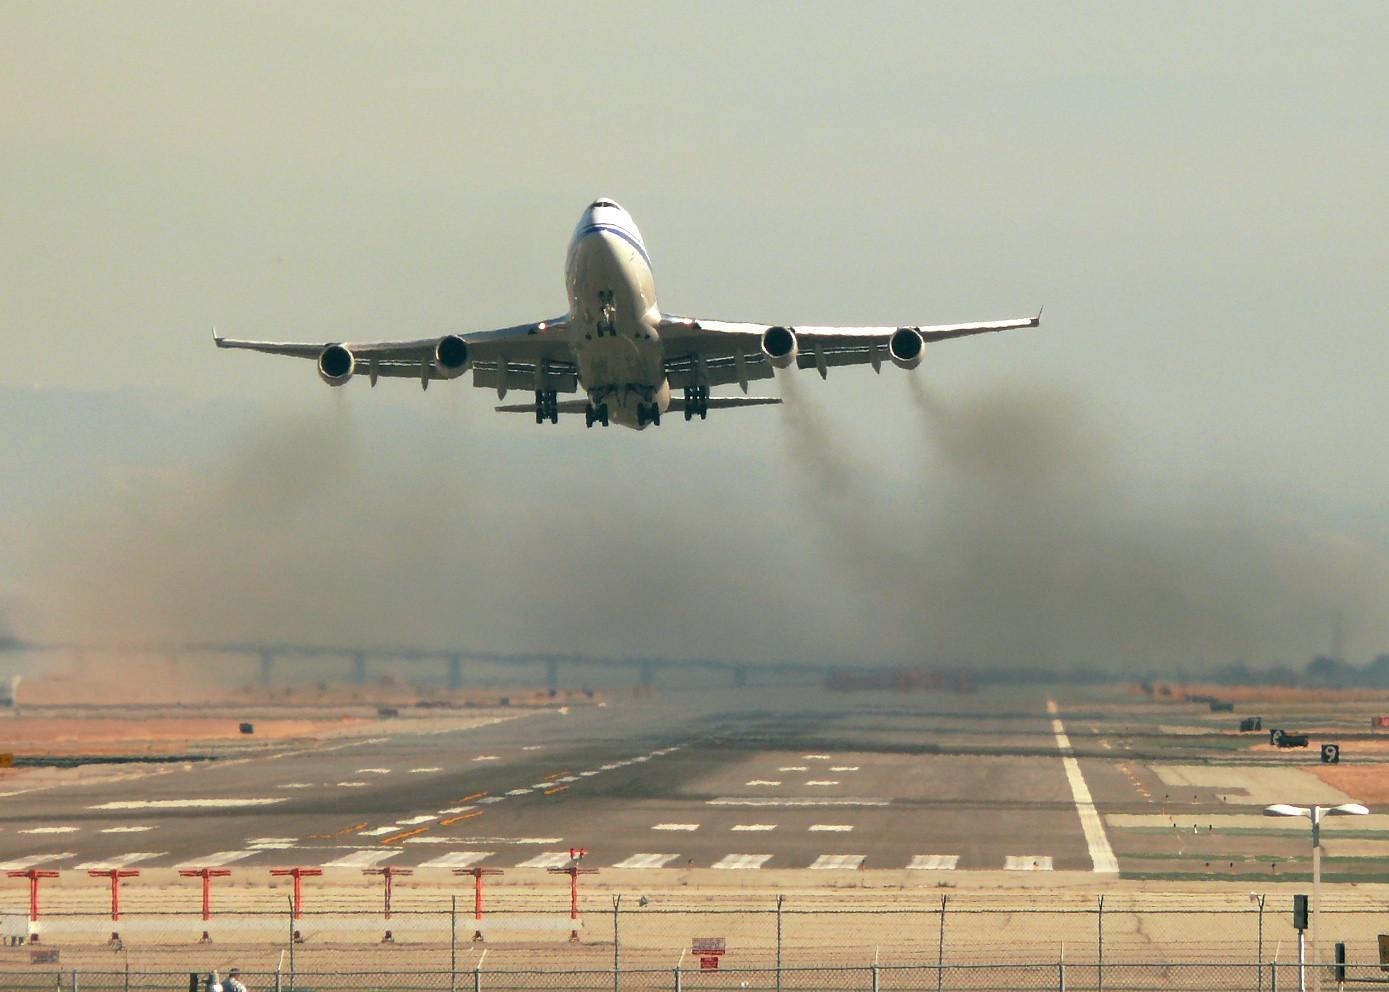 Gas Airplane: The Drawbacks of Gas Airplanes: Pollution and High Fuel Prices